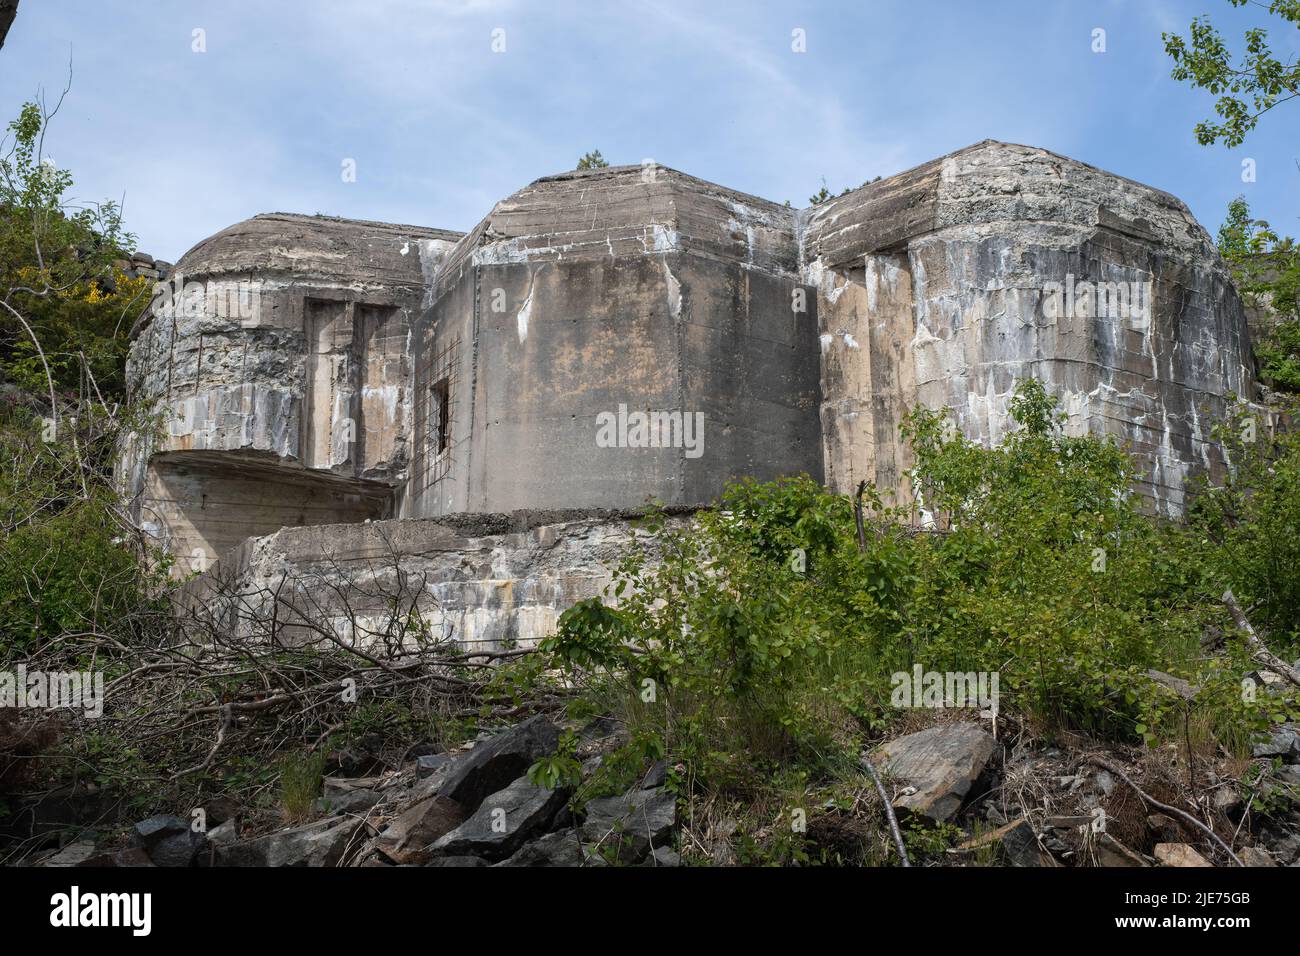 Arendal, Norway - May 28, 2022: Sandvikodden fort was built by the German occupation forces in 1941. The purpose was to secure the entrance to Arendal Stock Photo